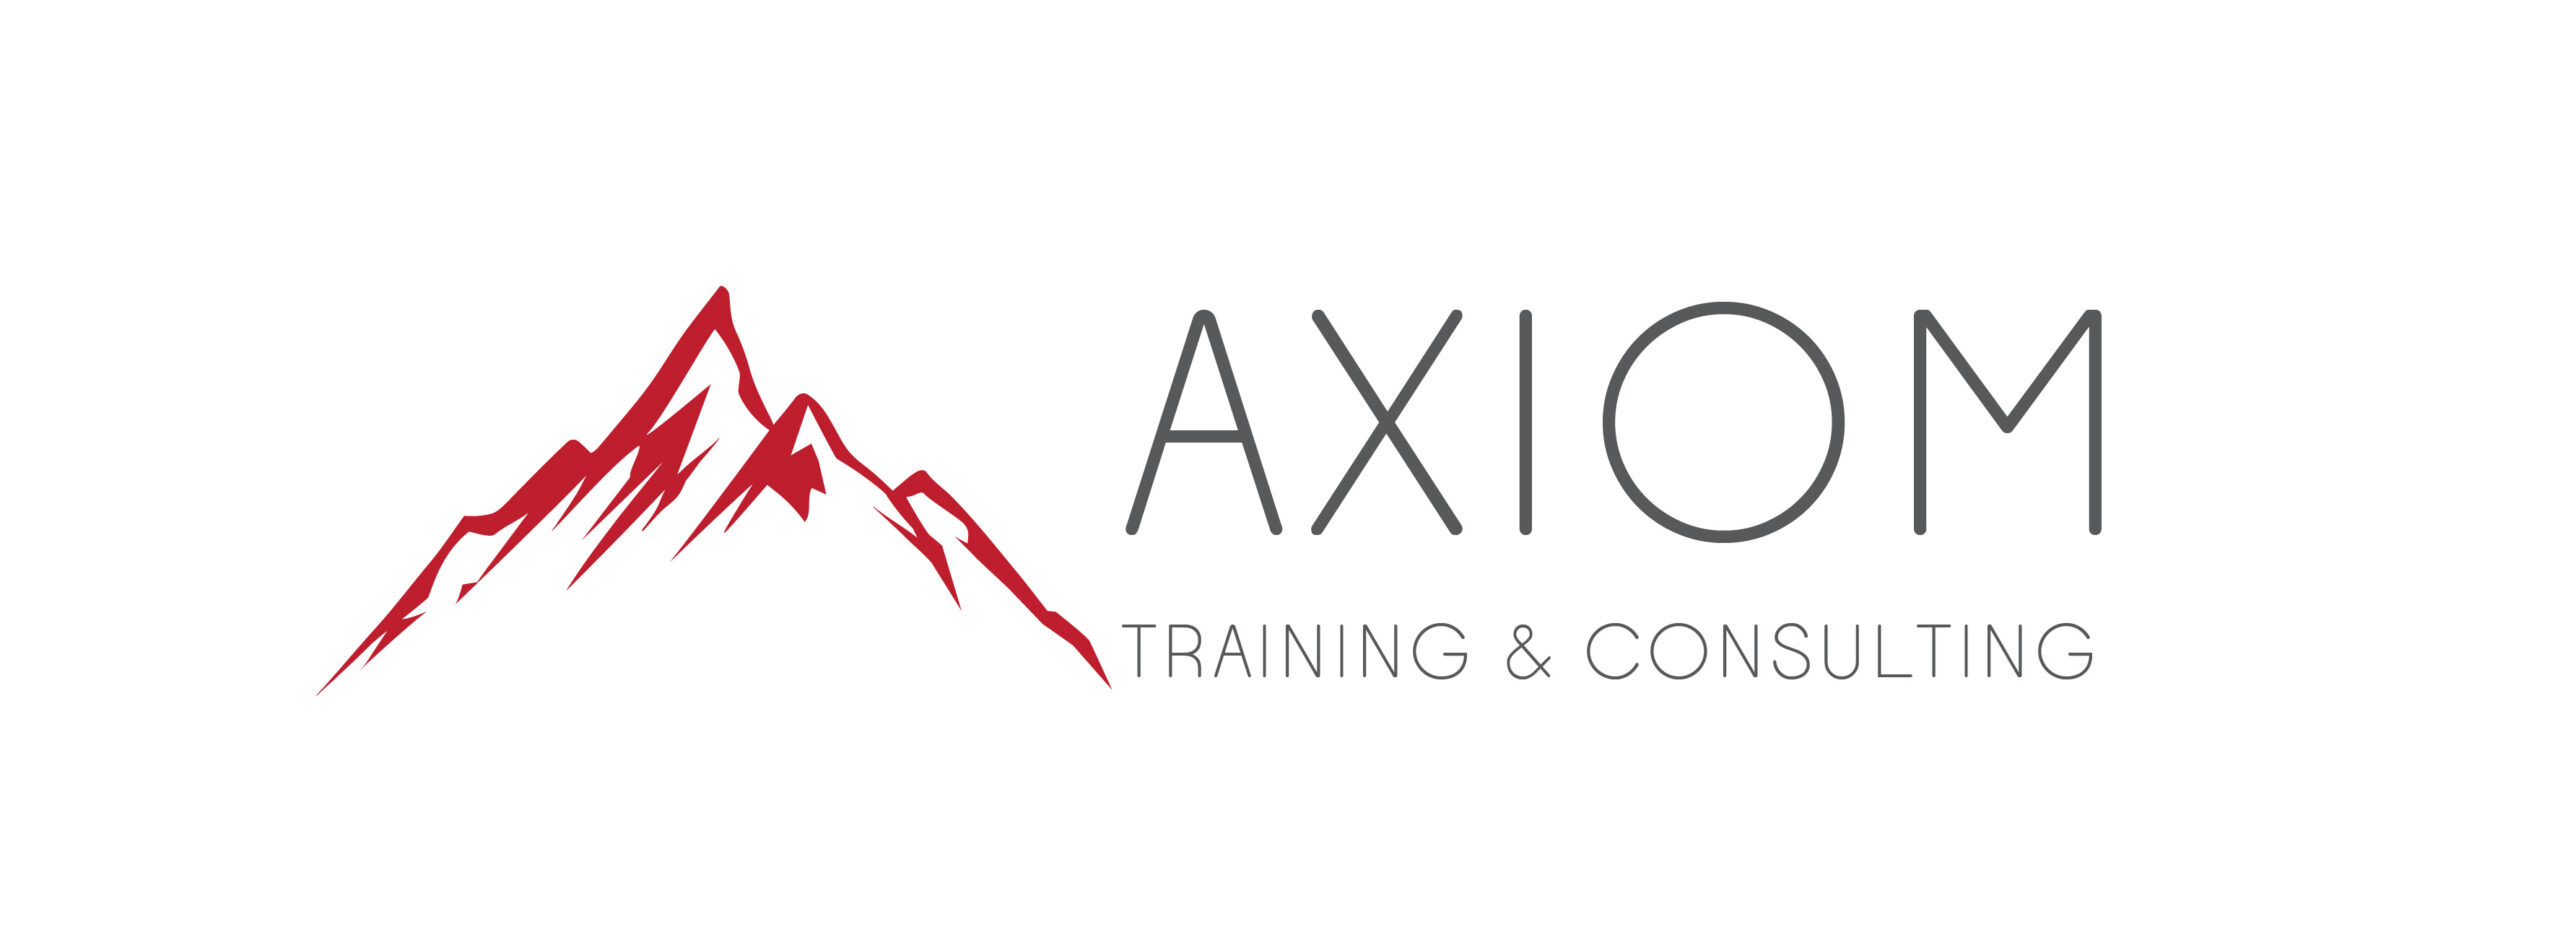 Axiom Training & Consulting Cover